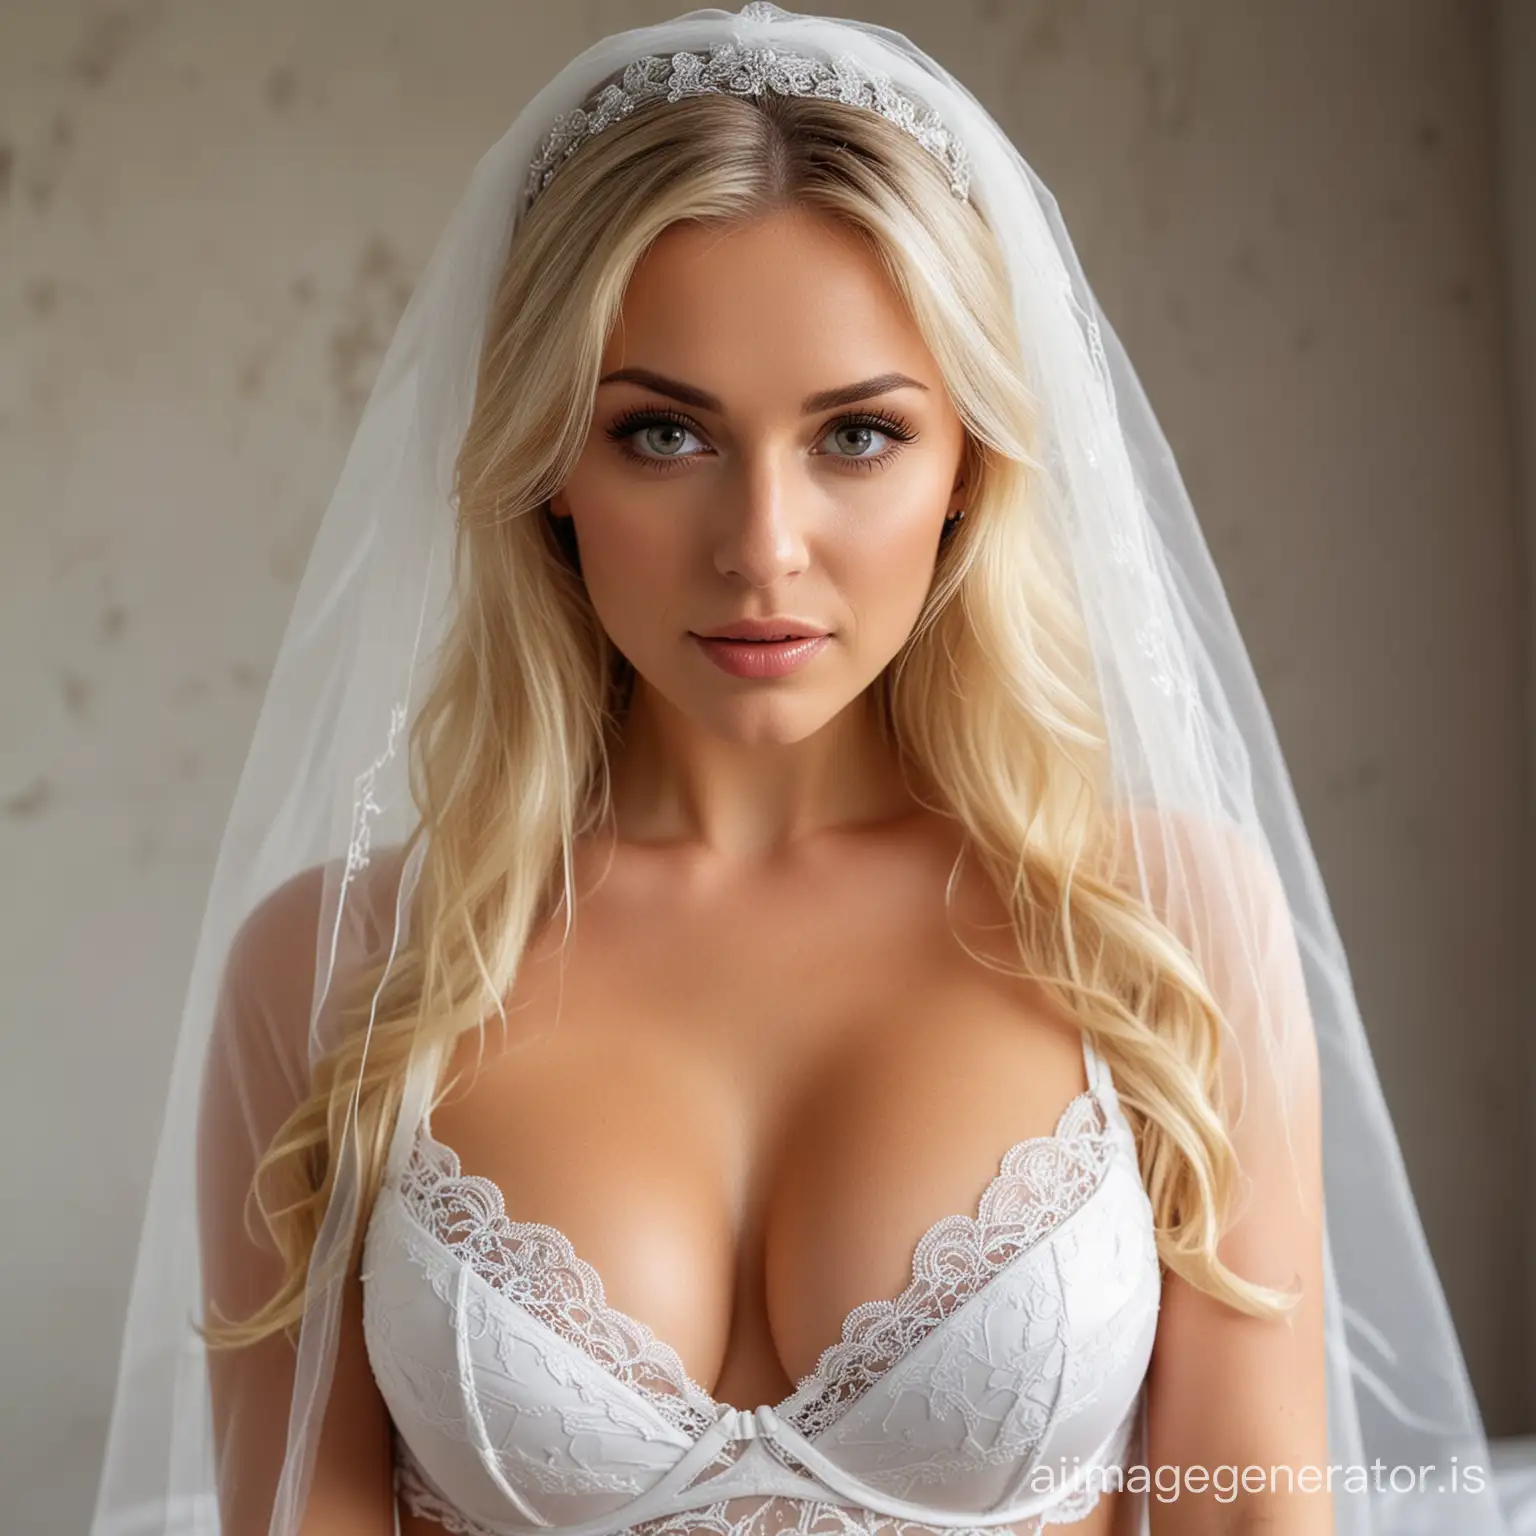 A blonde woman in white lingerie and a wedding veil. She has a sexy look on her face. She has huge breasts.